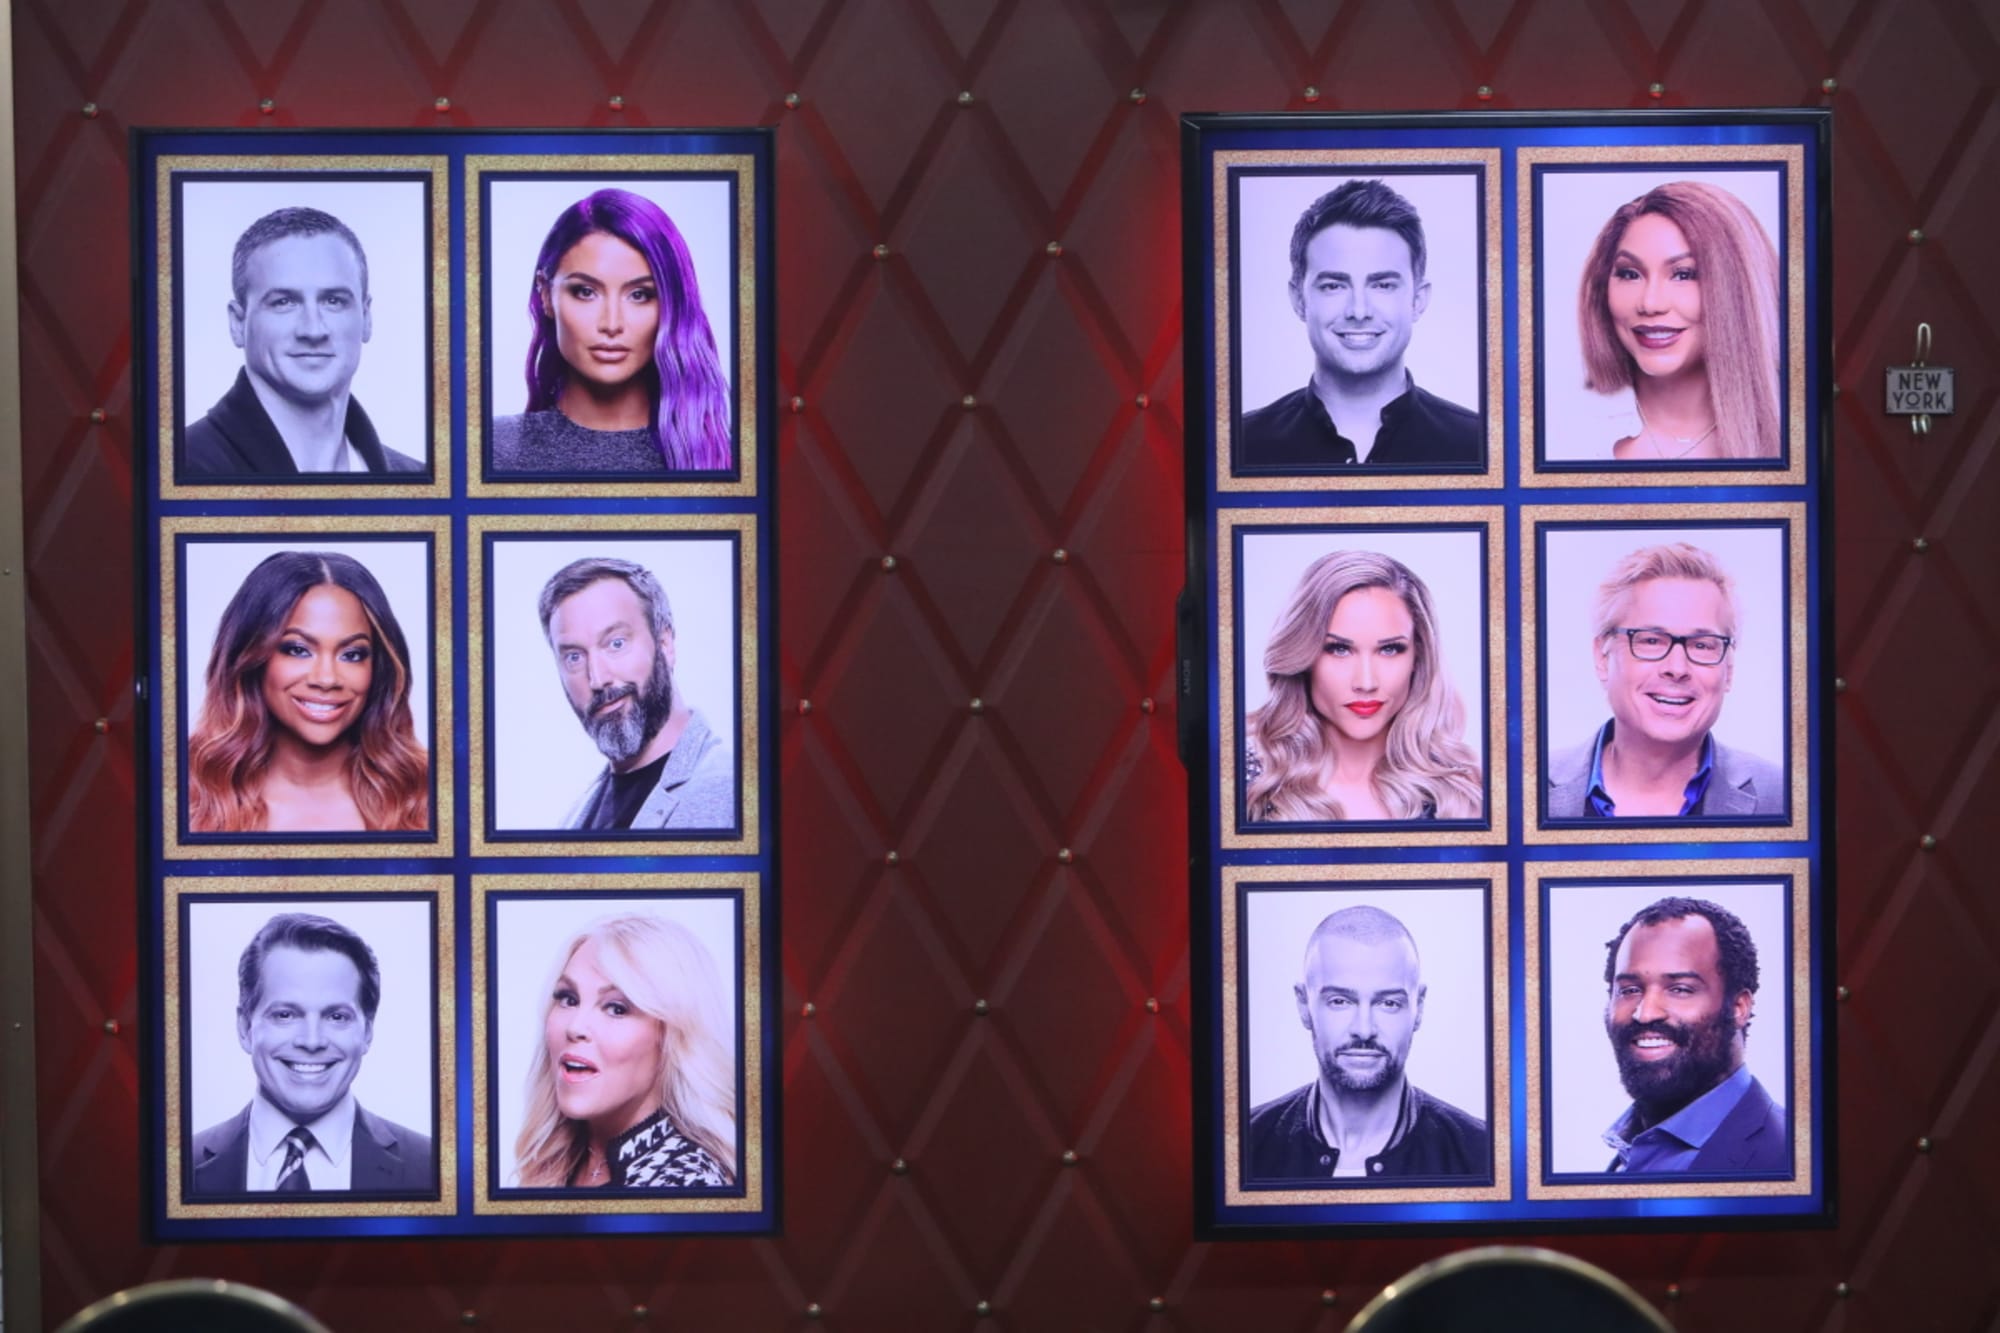 Who got evicted on Big Brother tonight? When is HOH Competition?